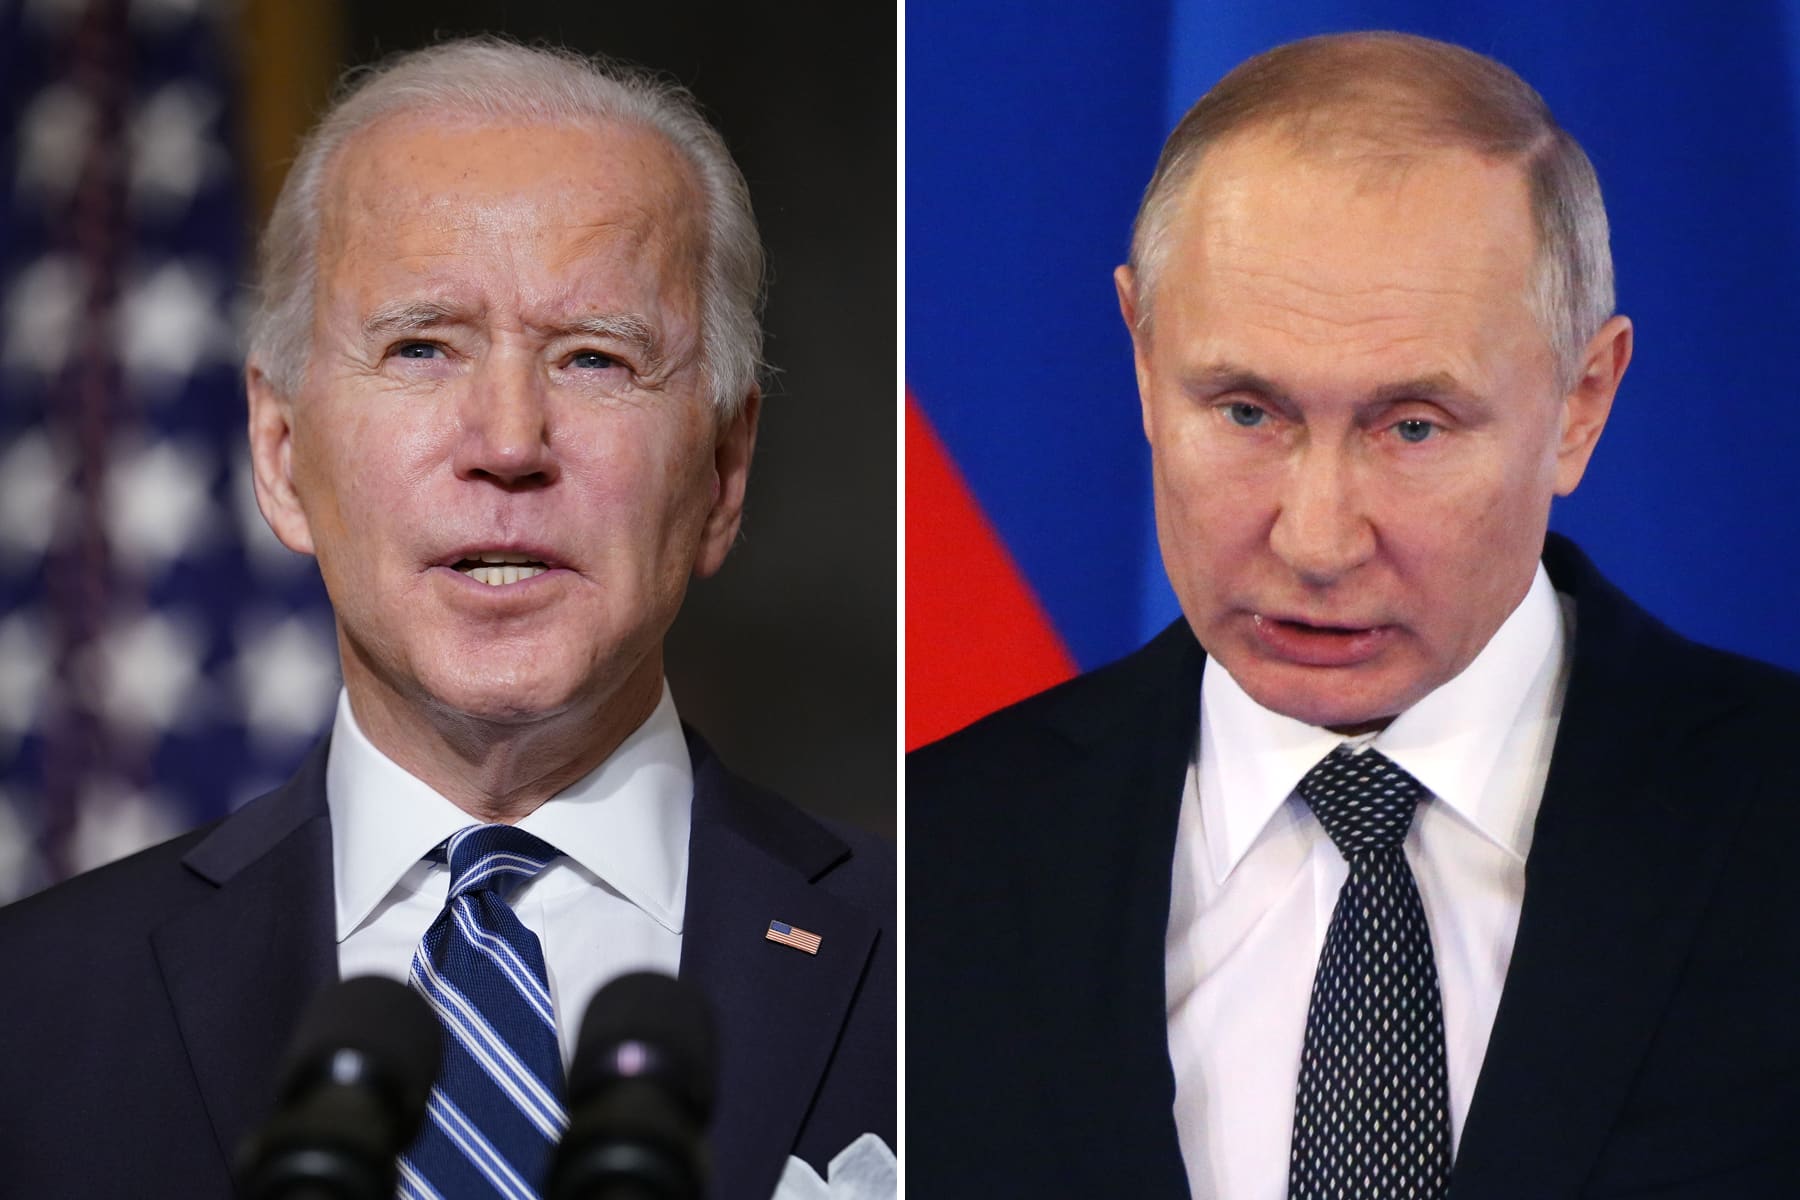 Biden’s government is imposing sanctions on Russia for cyber-attacks and election interference